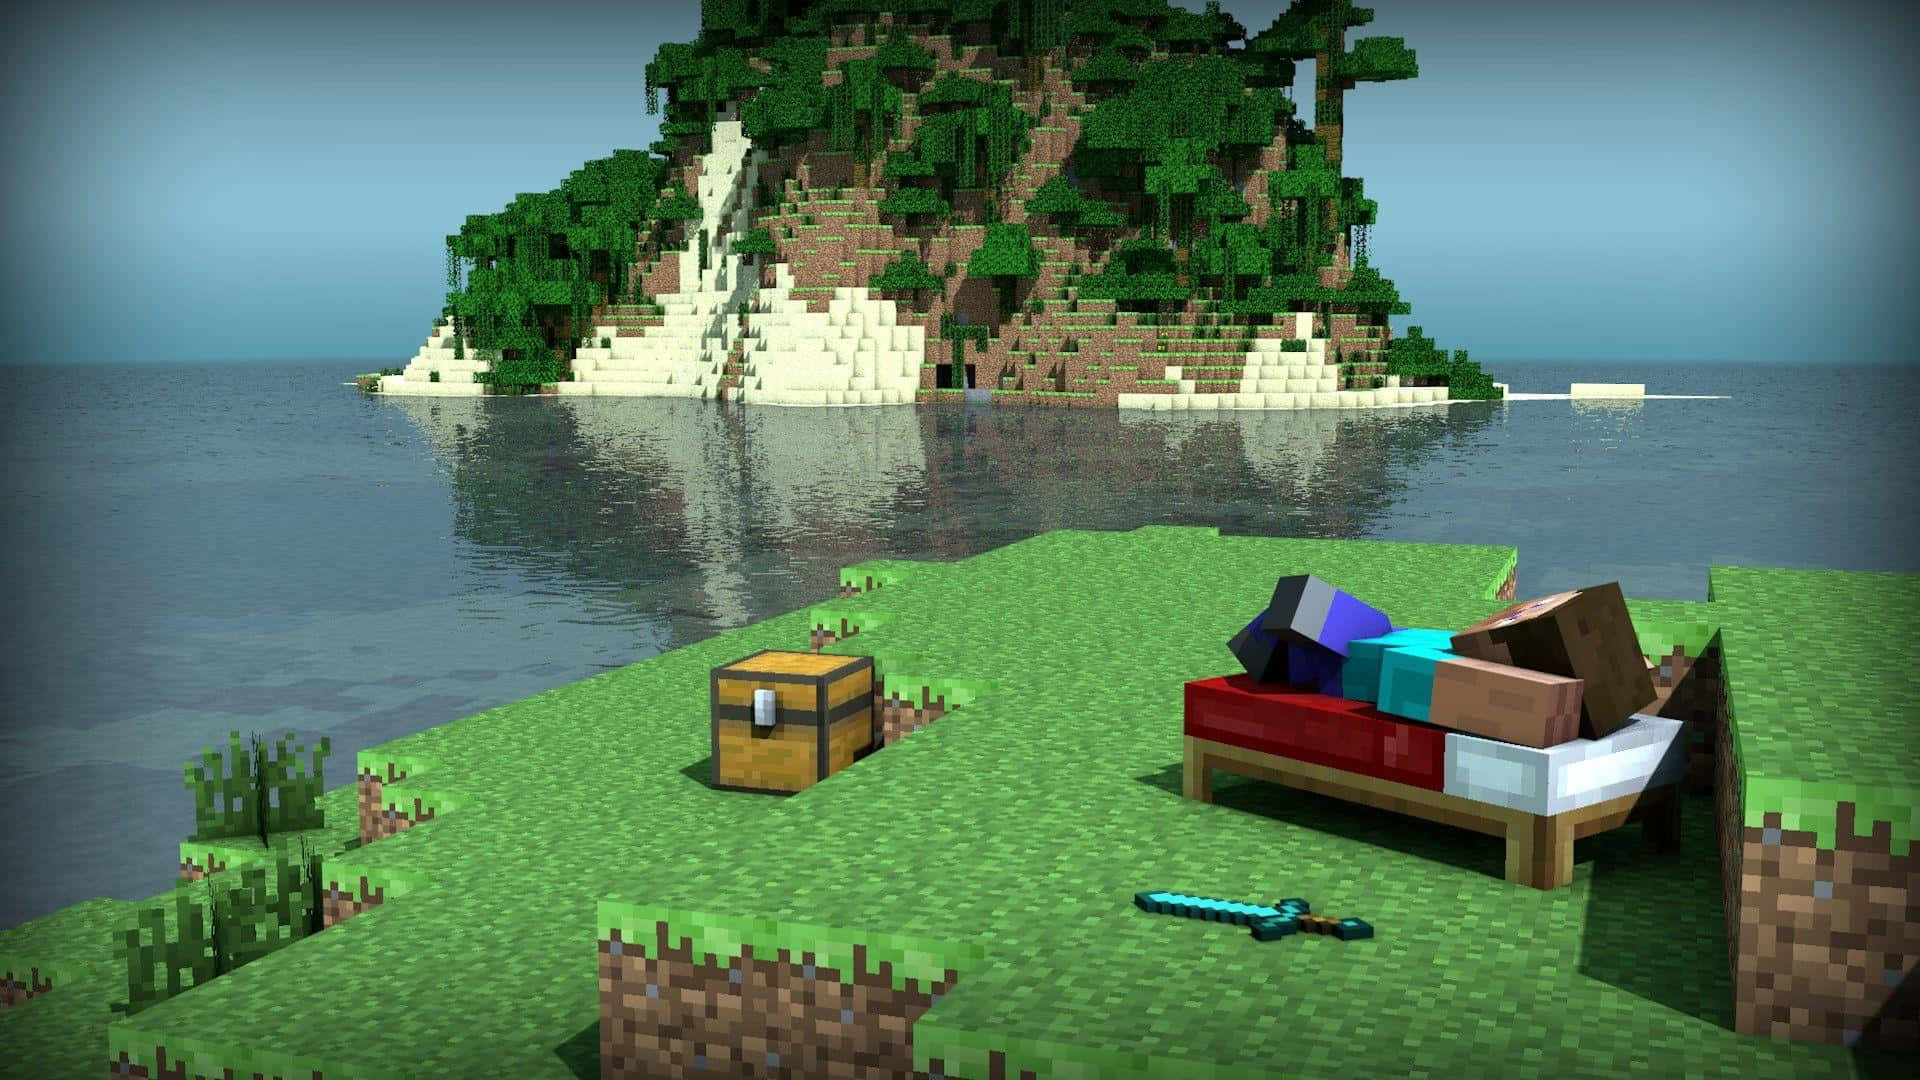 Relive the Wonderful World of Minecraft